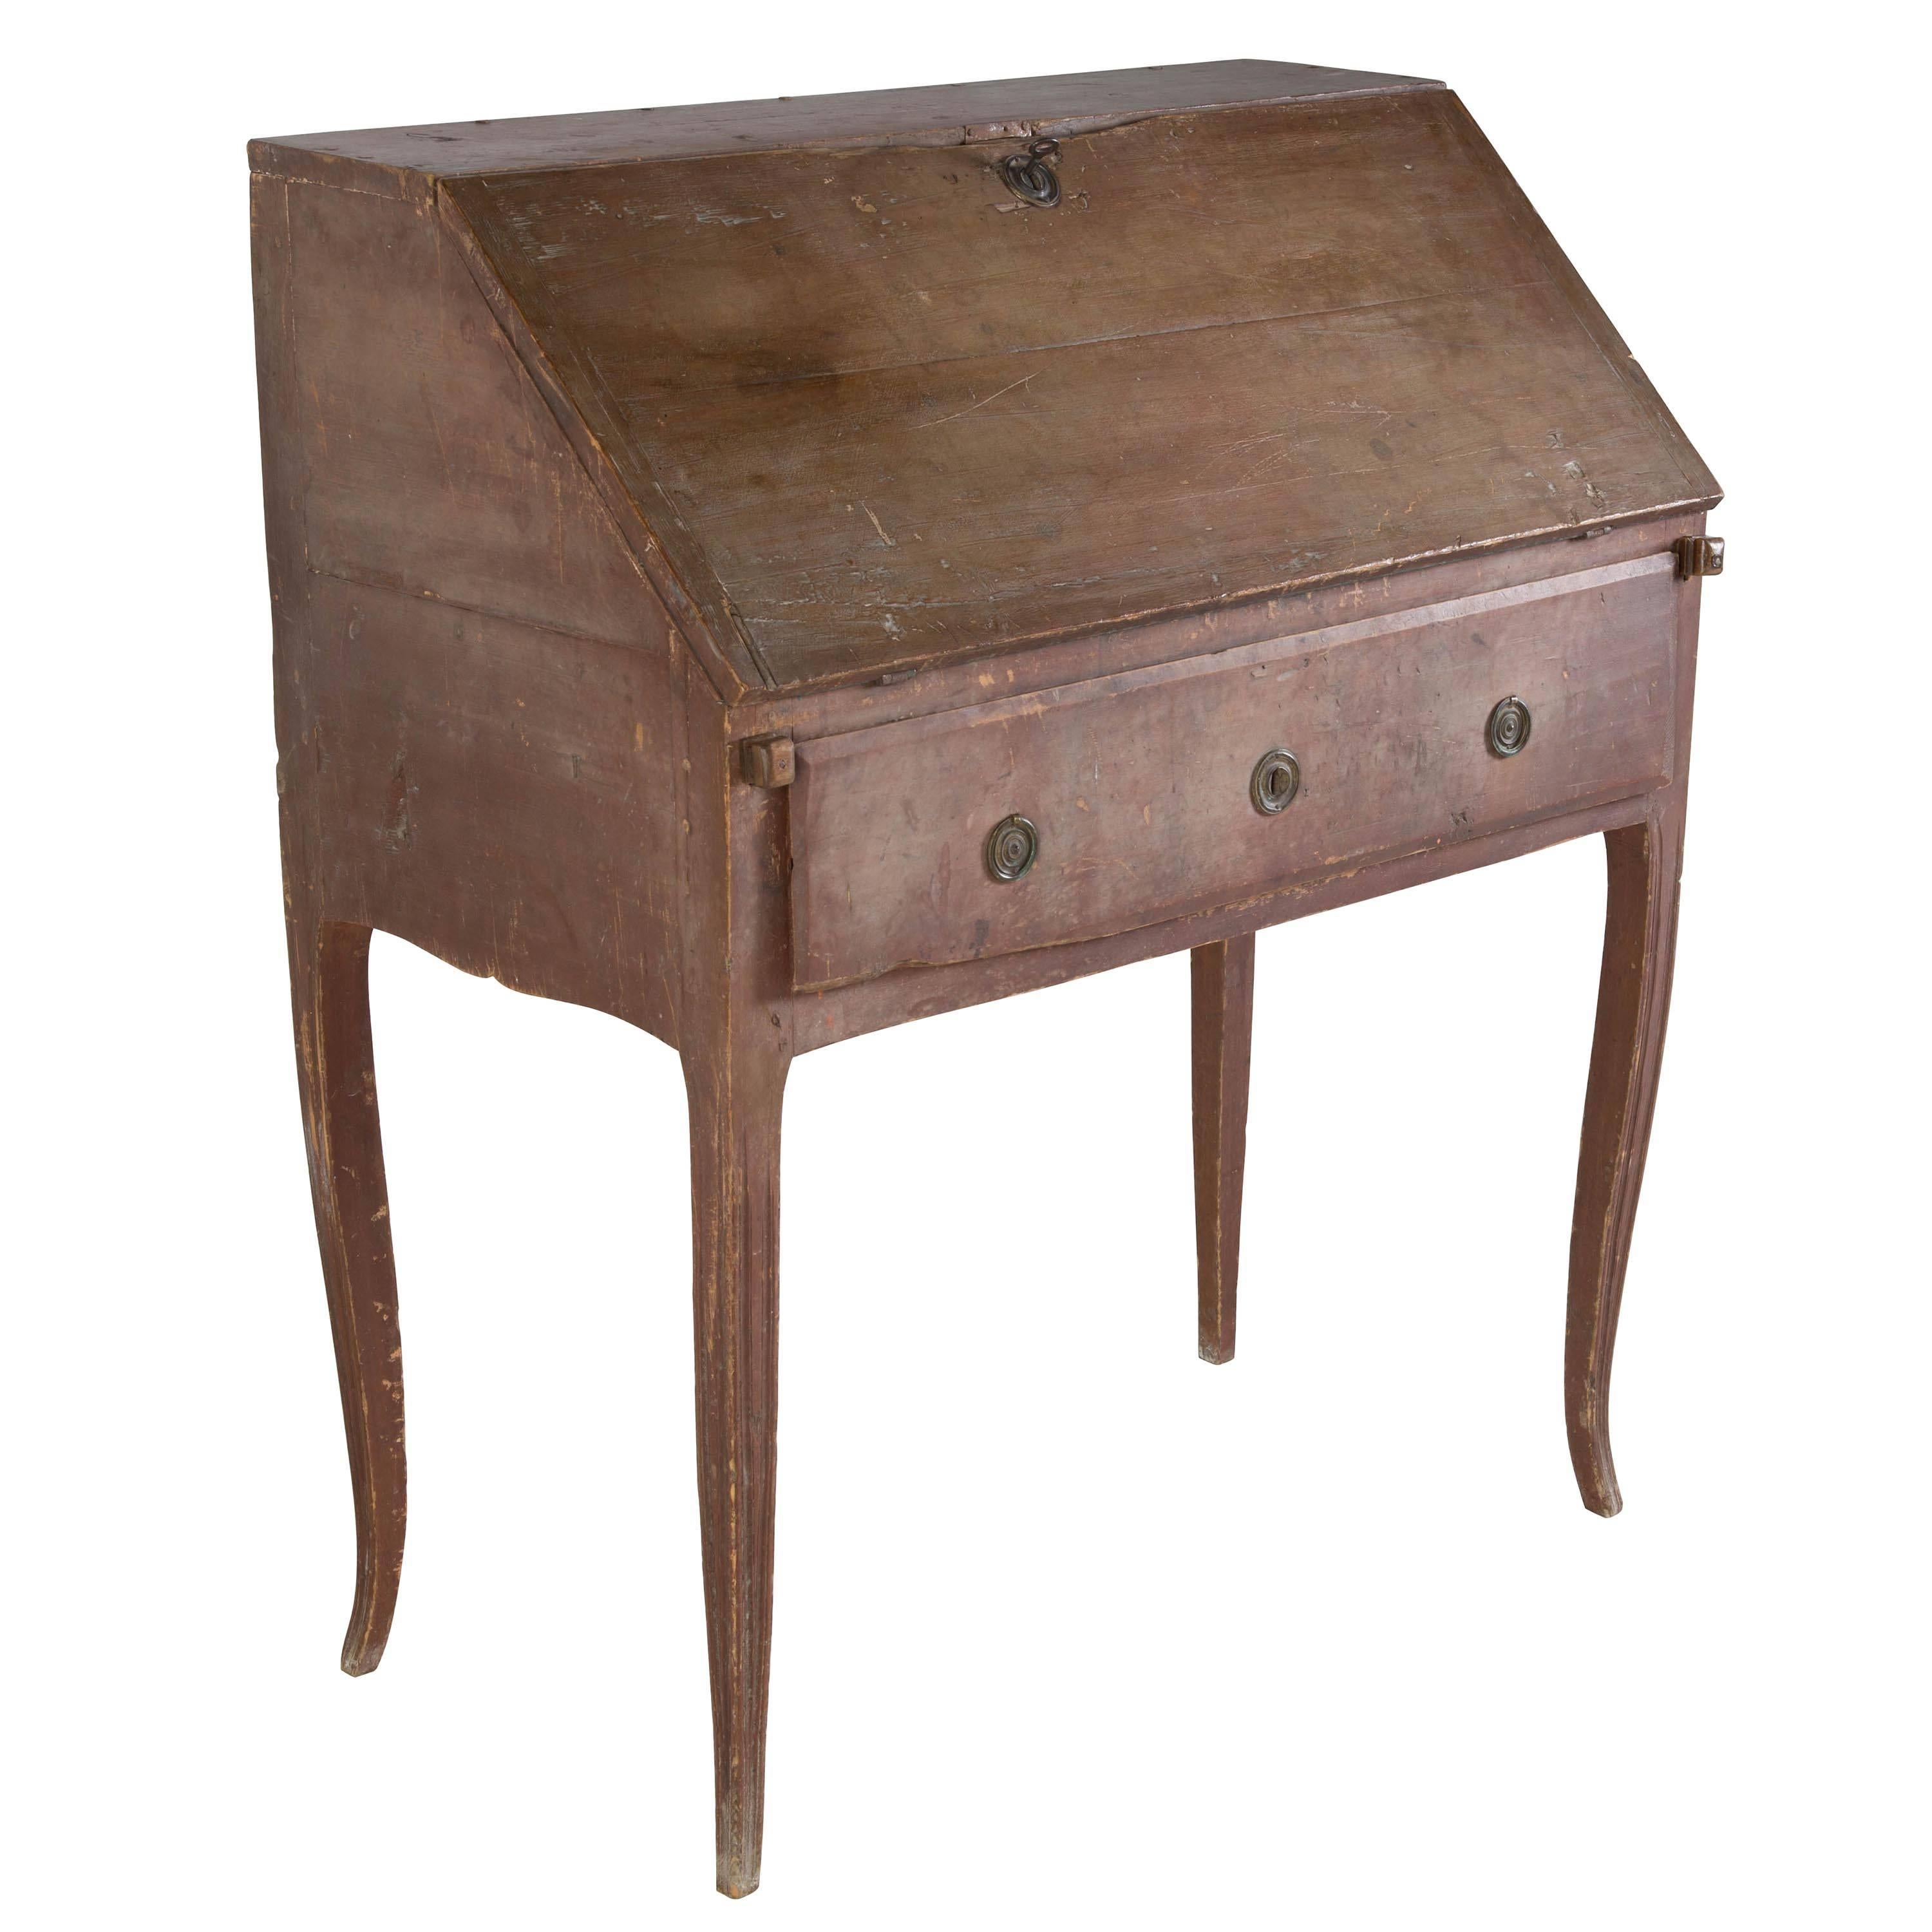 A provincial late 18th century Gustavian bureau in original paint and with charming interior.